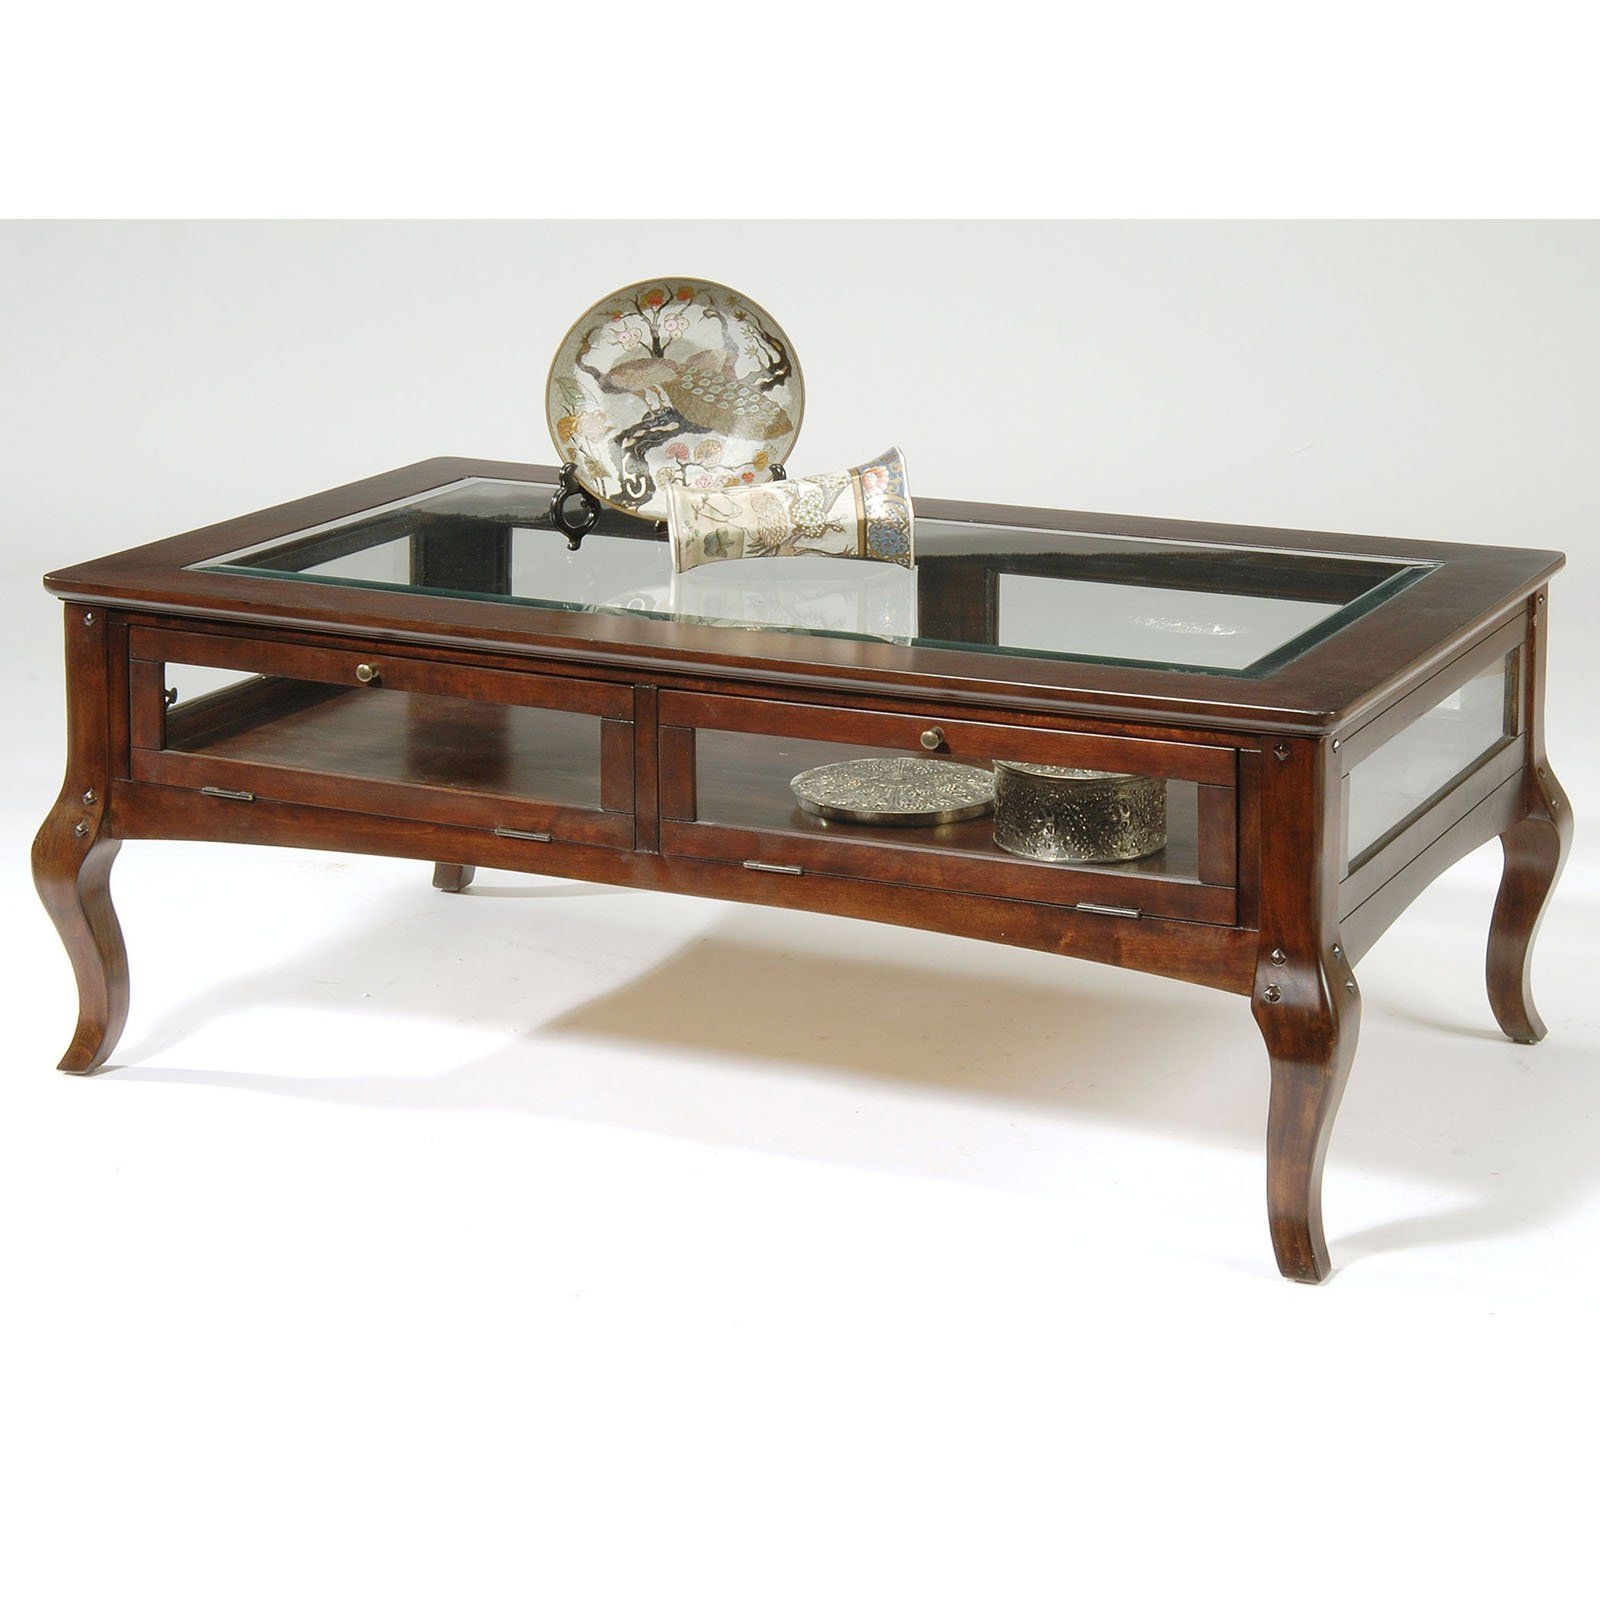 Shadow Box Coffee Table Youll Love In 2021 Visualhunt